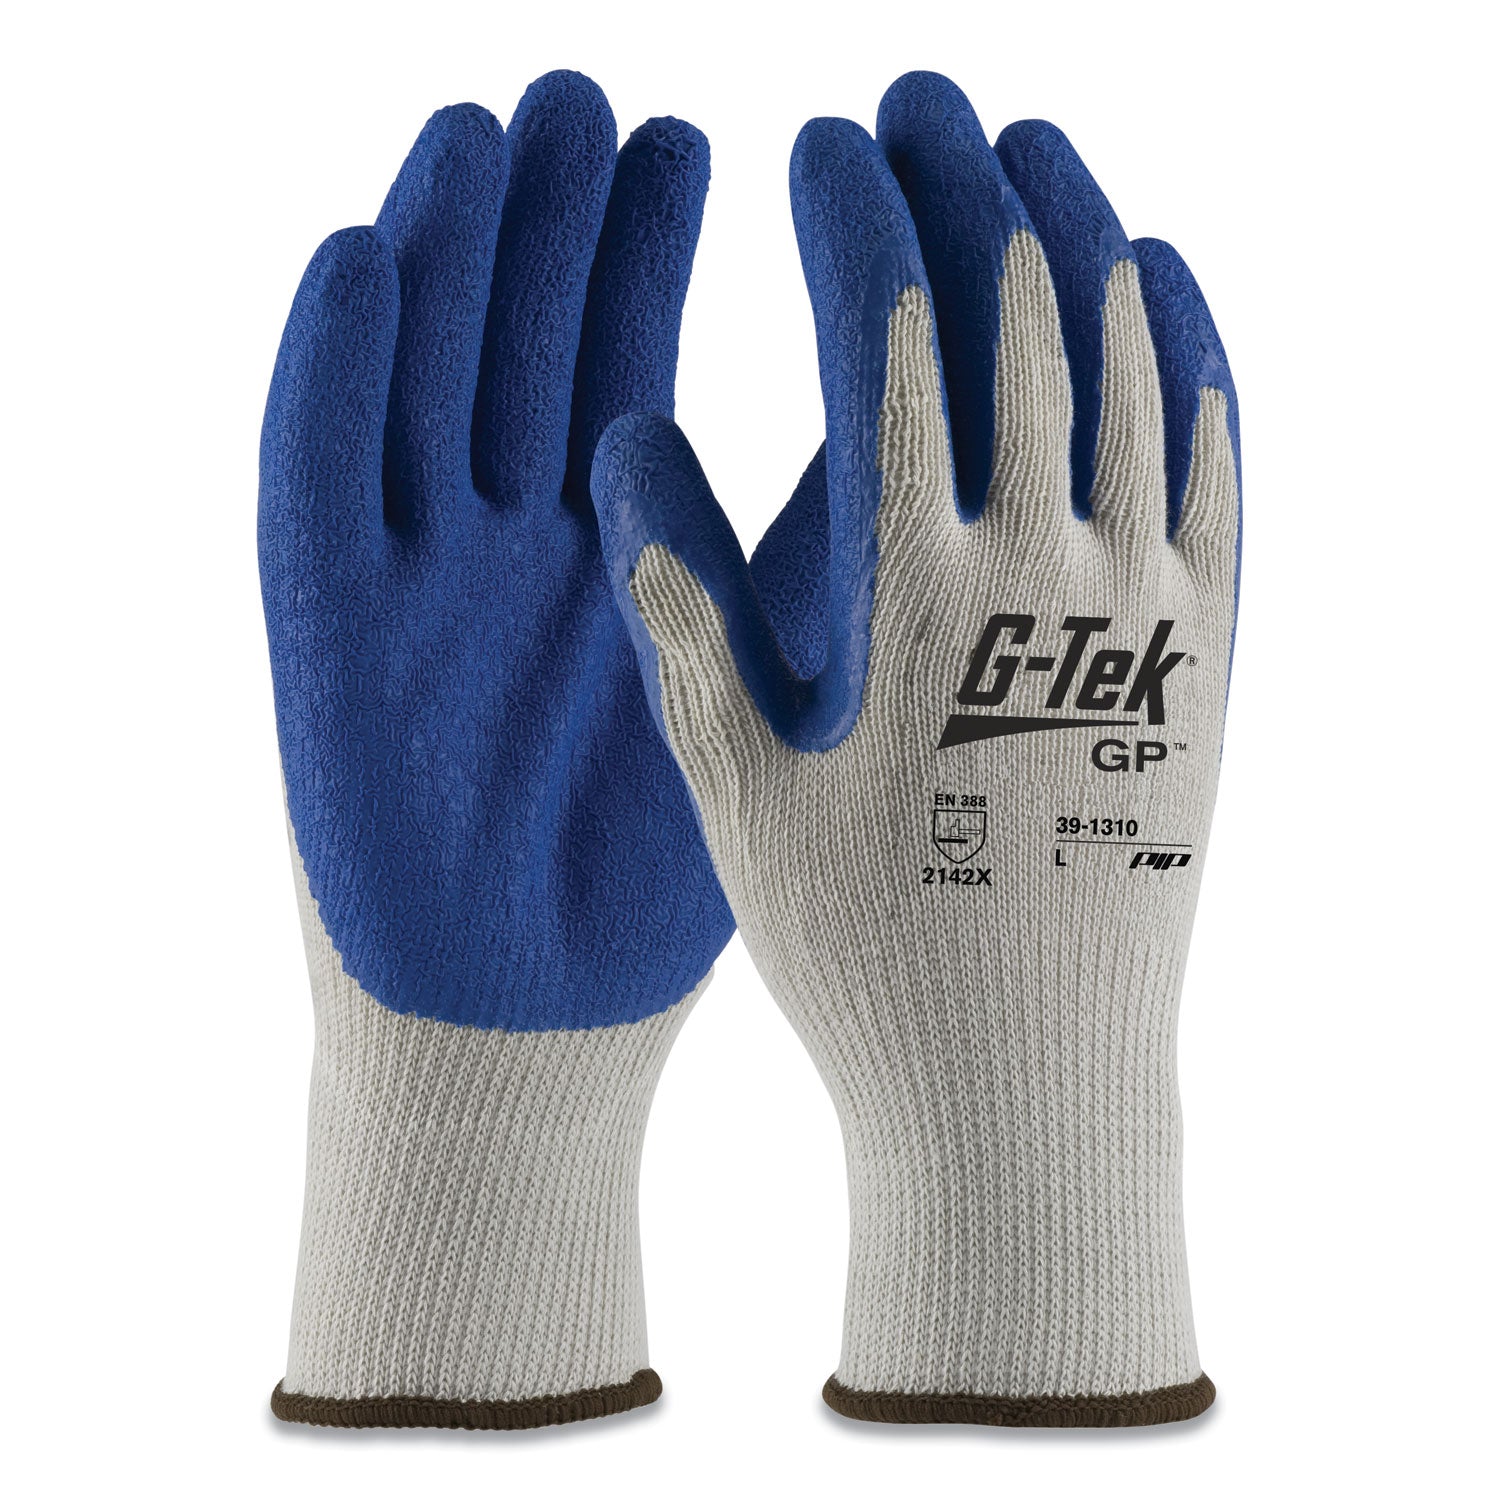 gp-latex-coated-cotton-polyester-gloves-large-gray-blue-12-pairs_pid391310l - 1